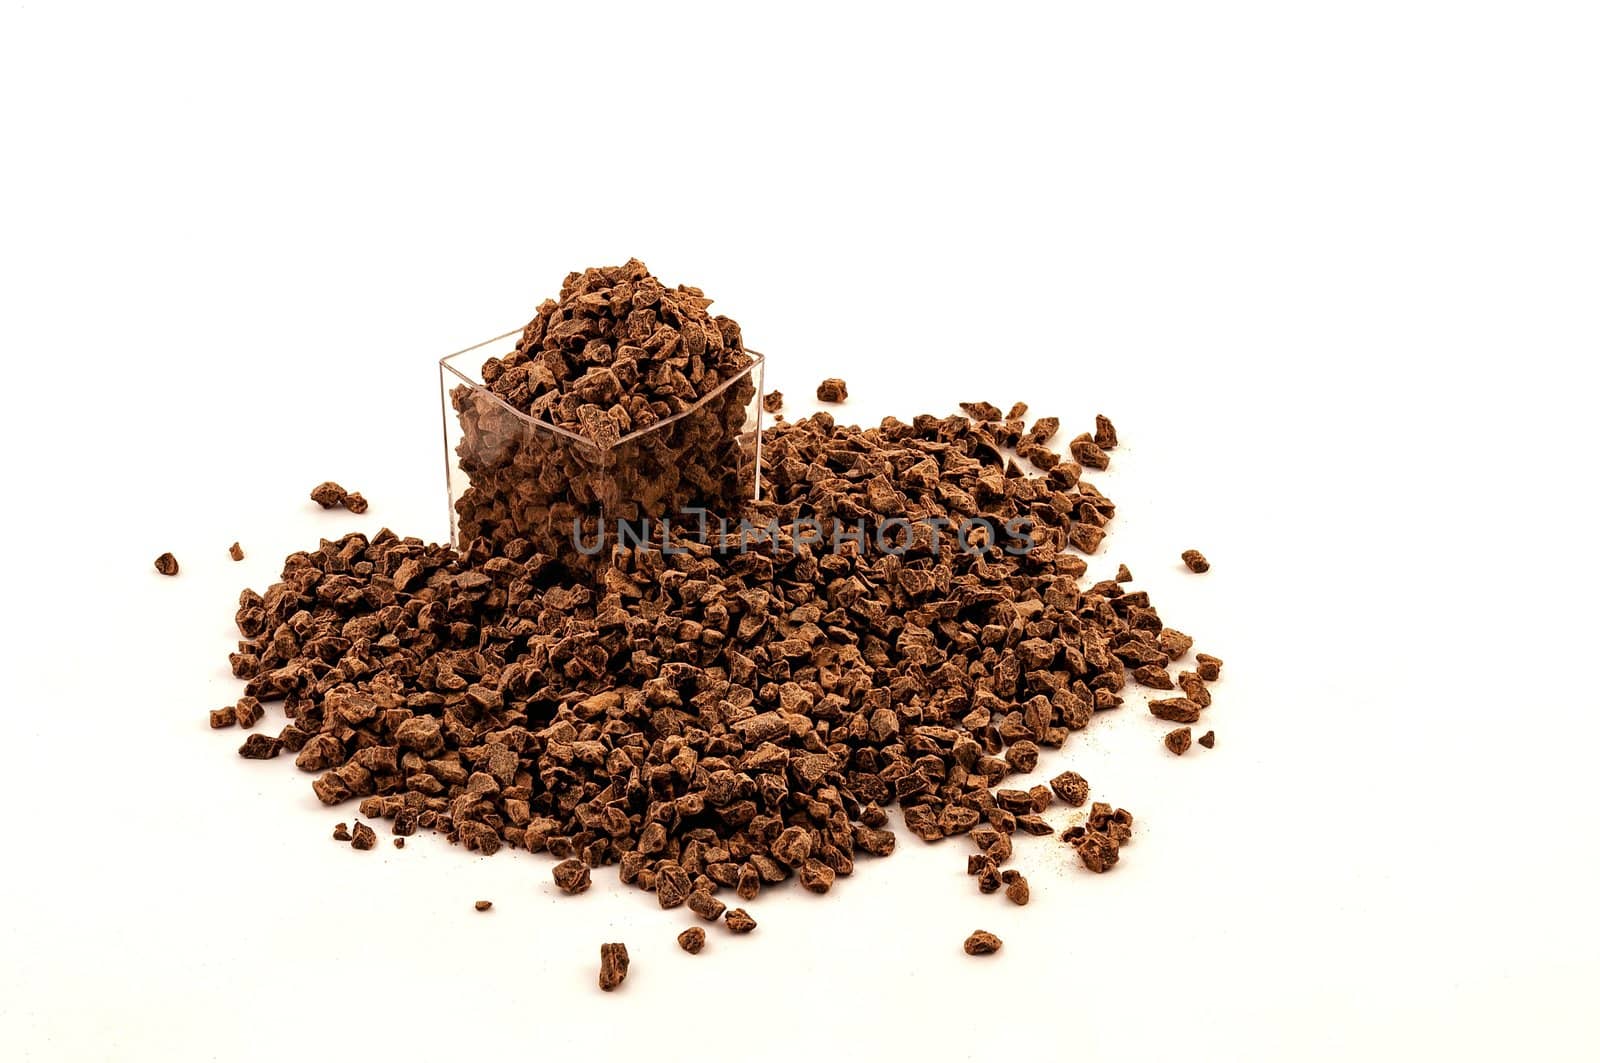 Crumbled chocolate ingredient pile on white background